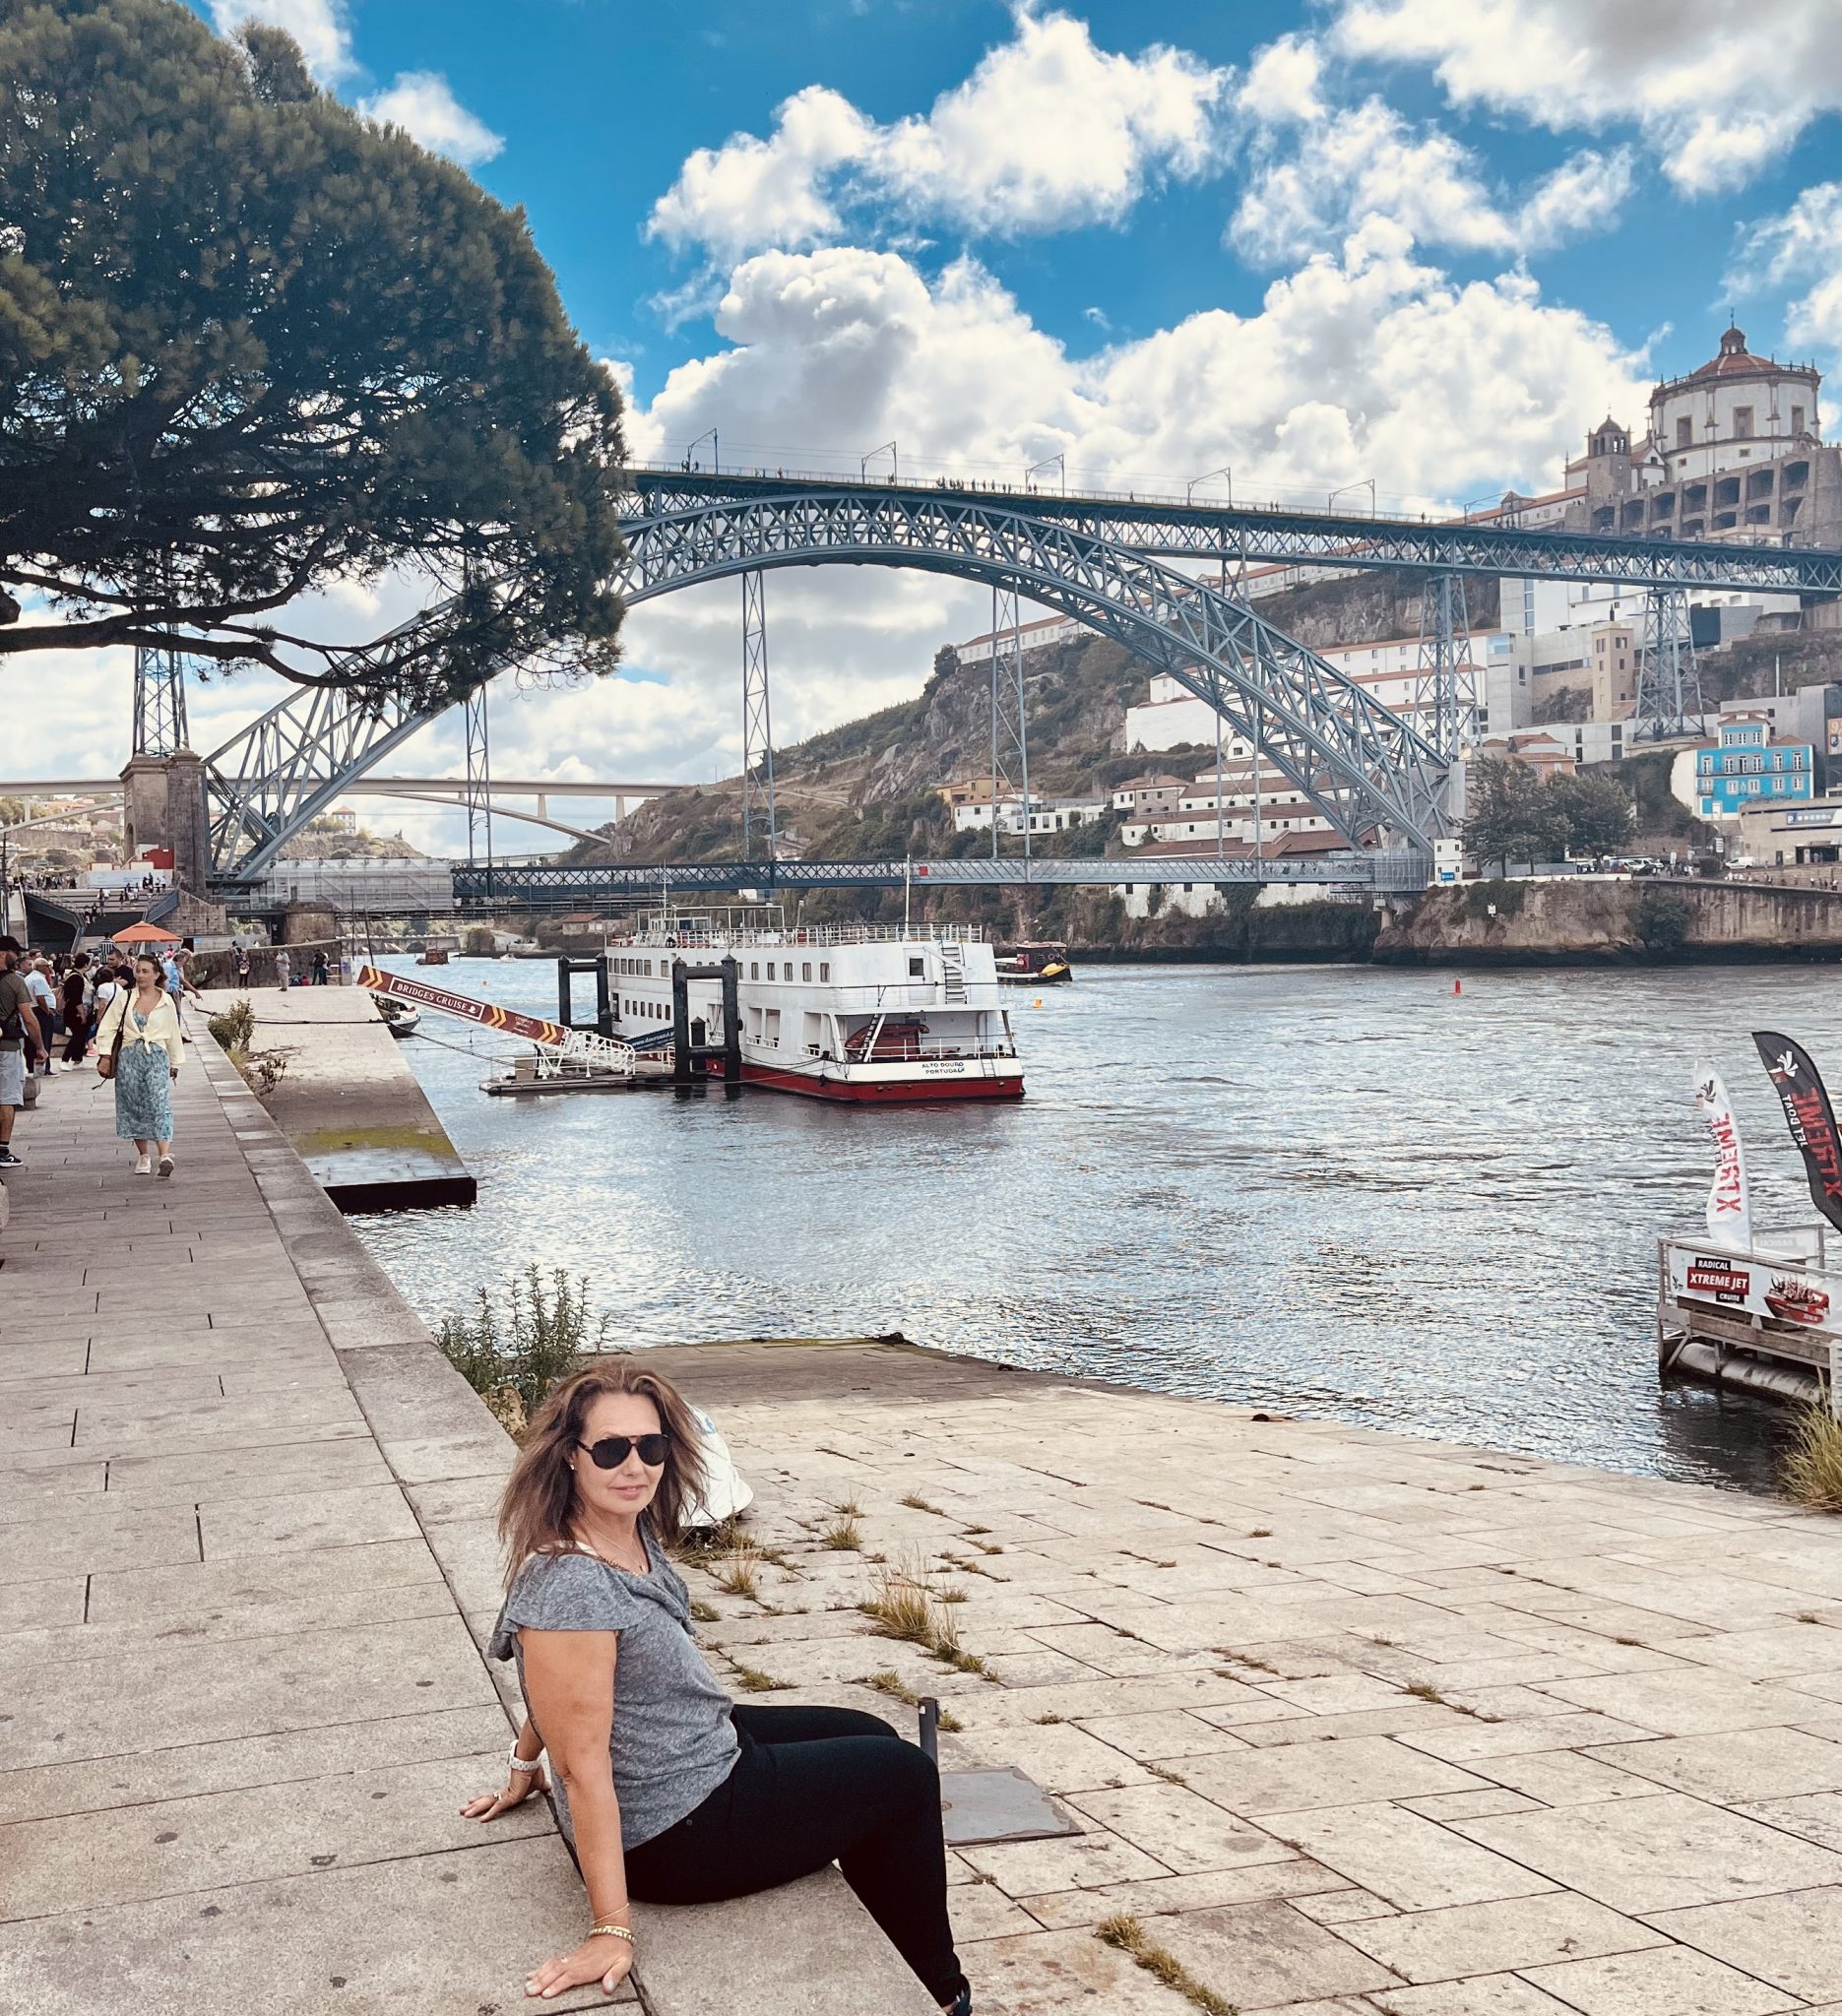  9 Best Things to do in Porto 1.Walk the Dom Luís I Bridge